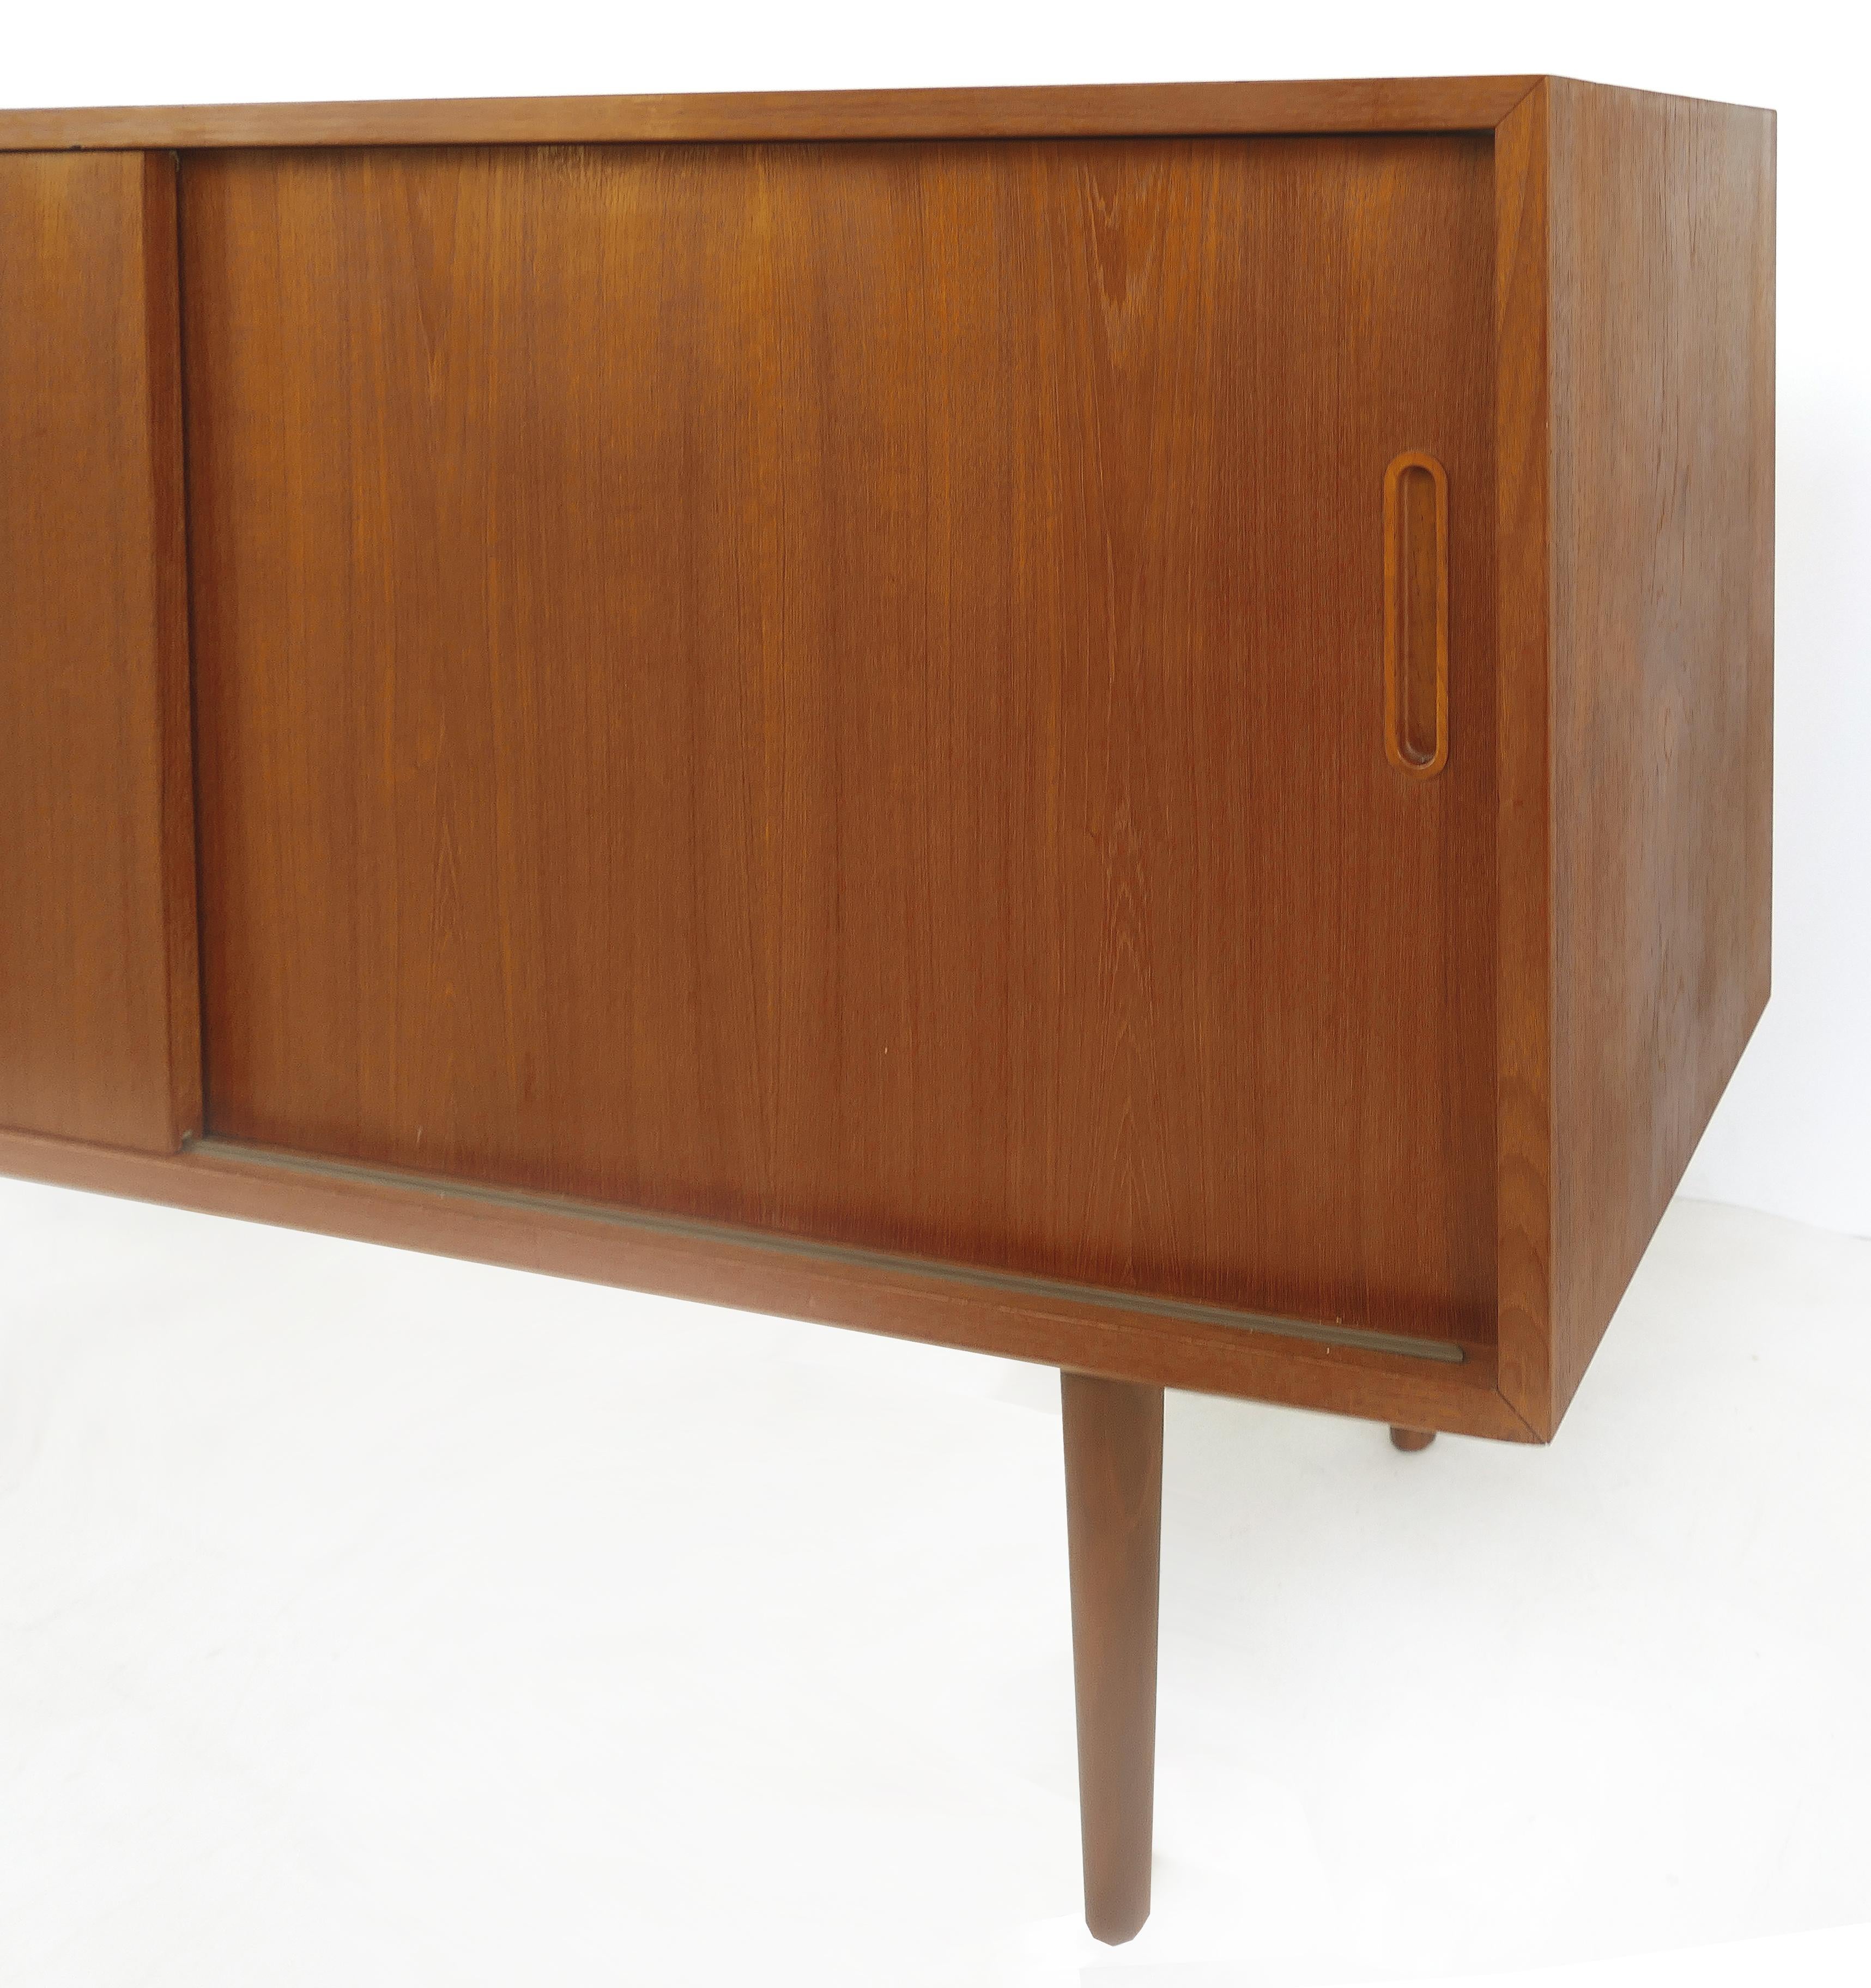 Paul Hundevad petite teak credenza server cabinet


Offered for sale is a small teak Danish modern server cabinet by Poul Hundevad of Sweden. The cabinet has sliding doors that open to reveal open shelves with a slender felt-lined drawer on the